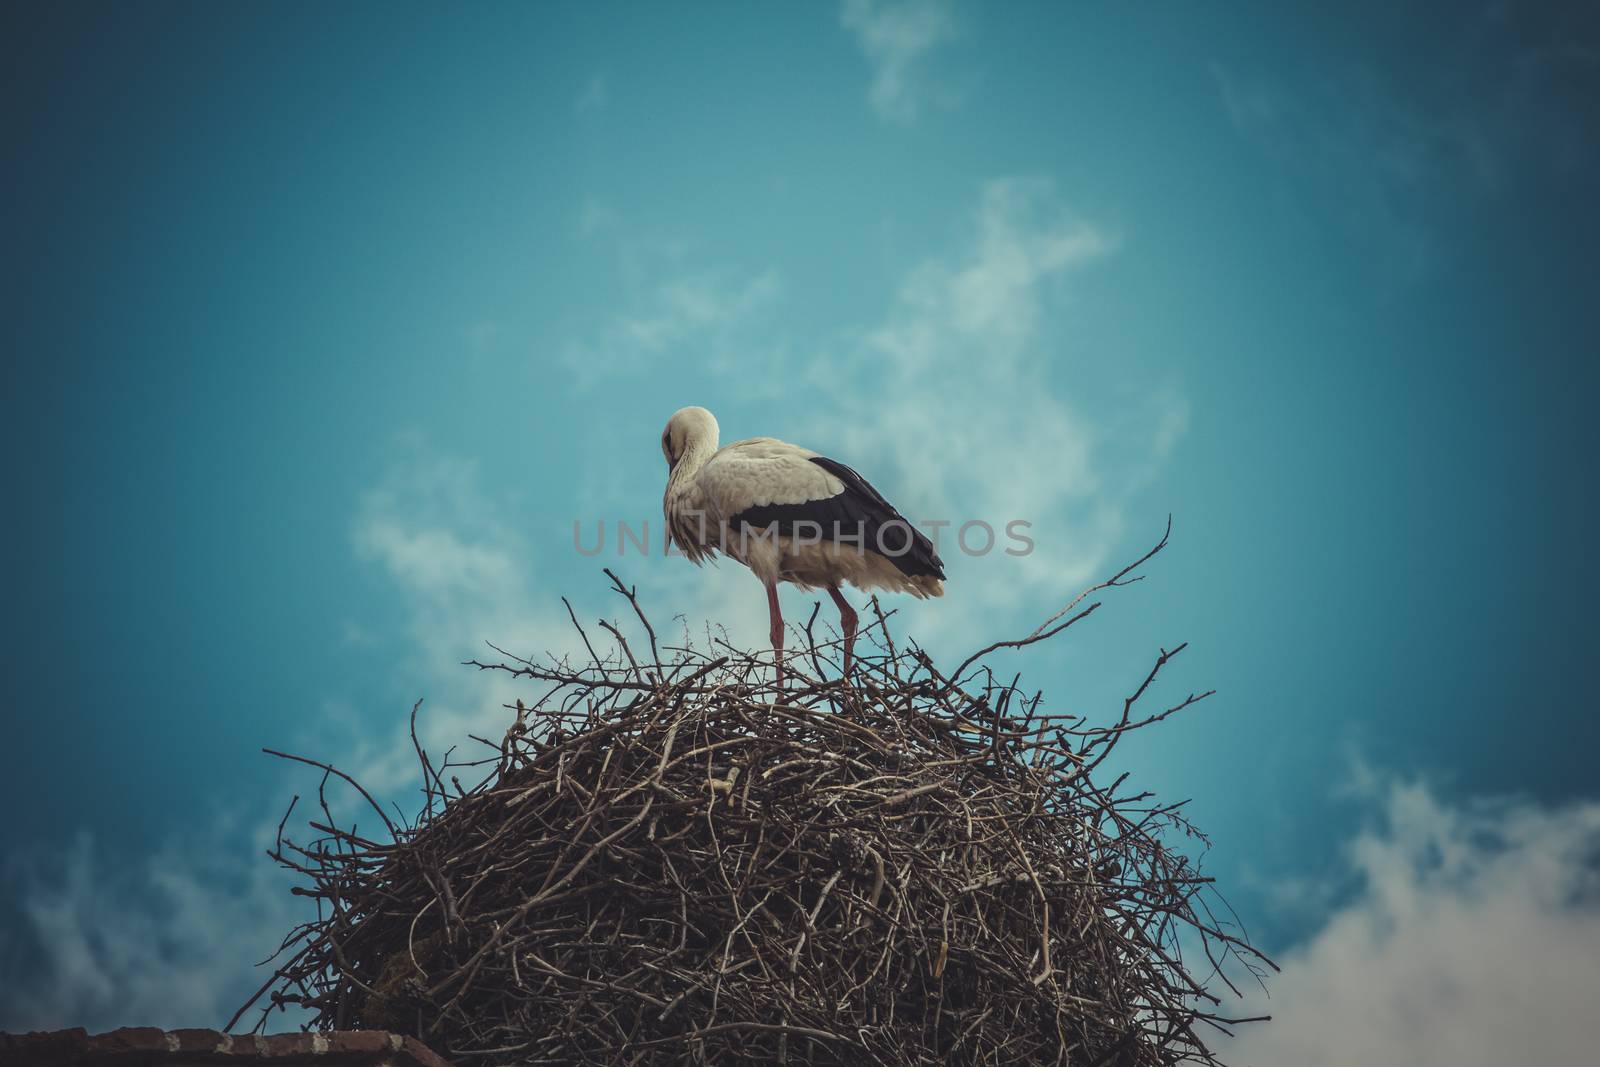 Summer, Stork nest made ������of tree branches over blue sky in dramatic